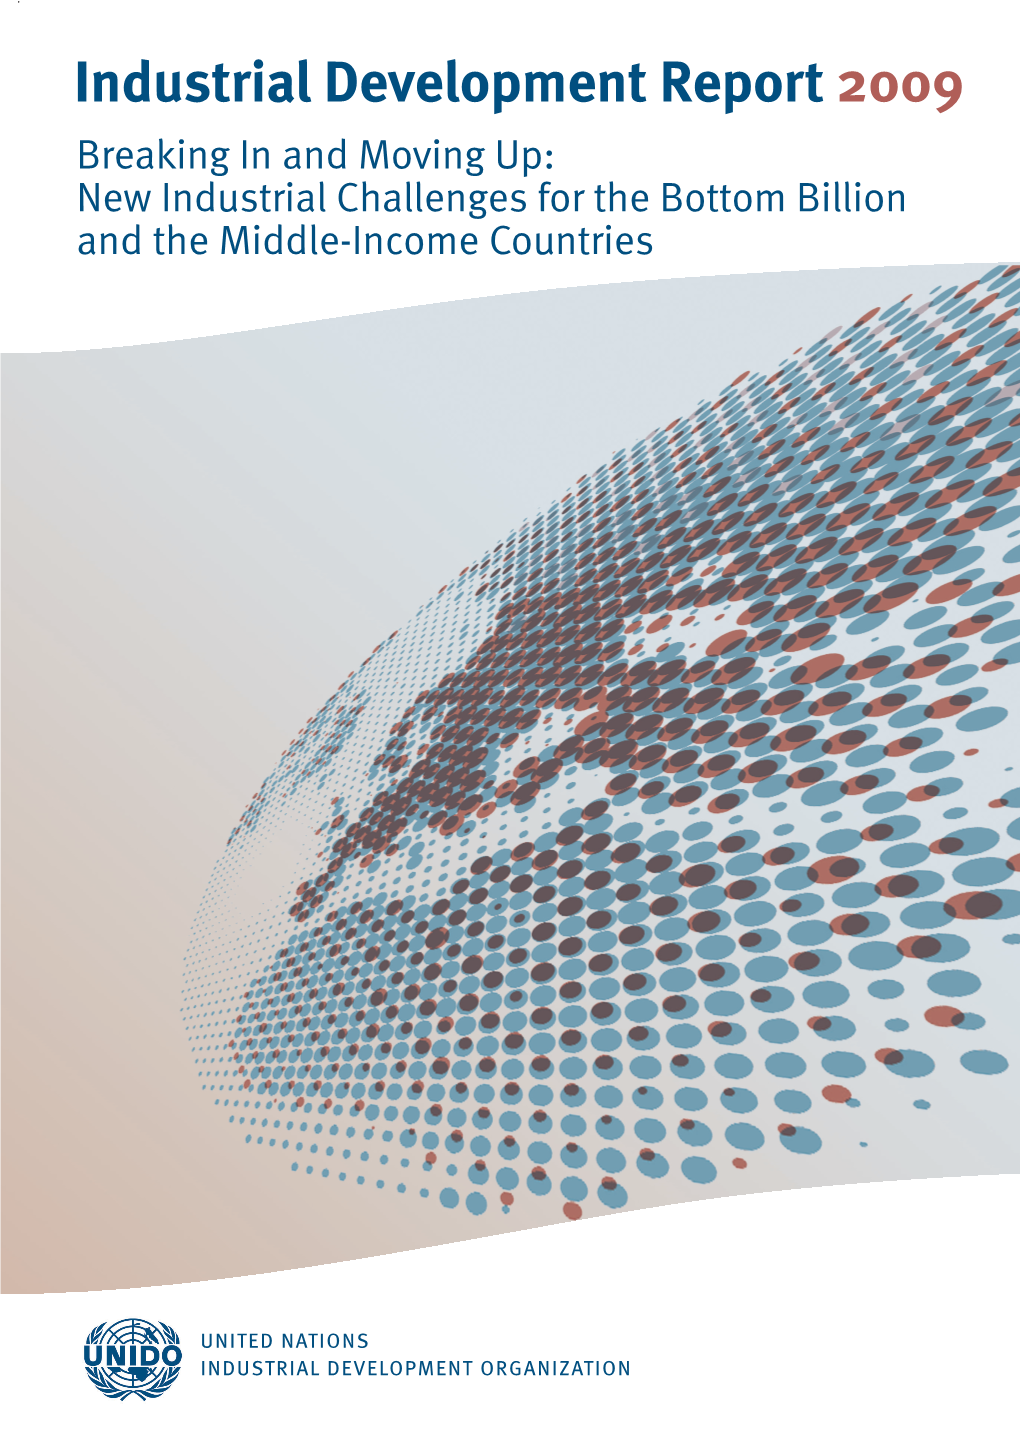 Industrial Development Report 2009 Breaking in and Moving Up: New Industrial Challenges for the Bottom Billion and the Middle-Income Countries